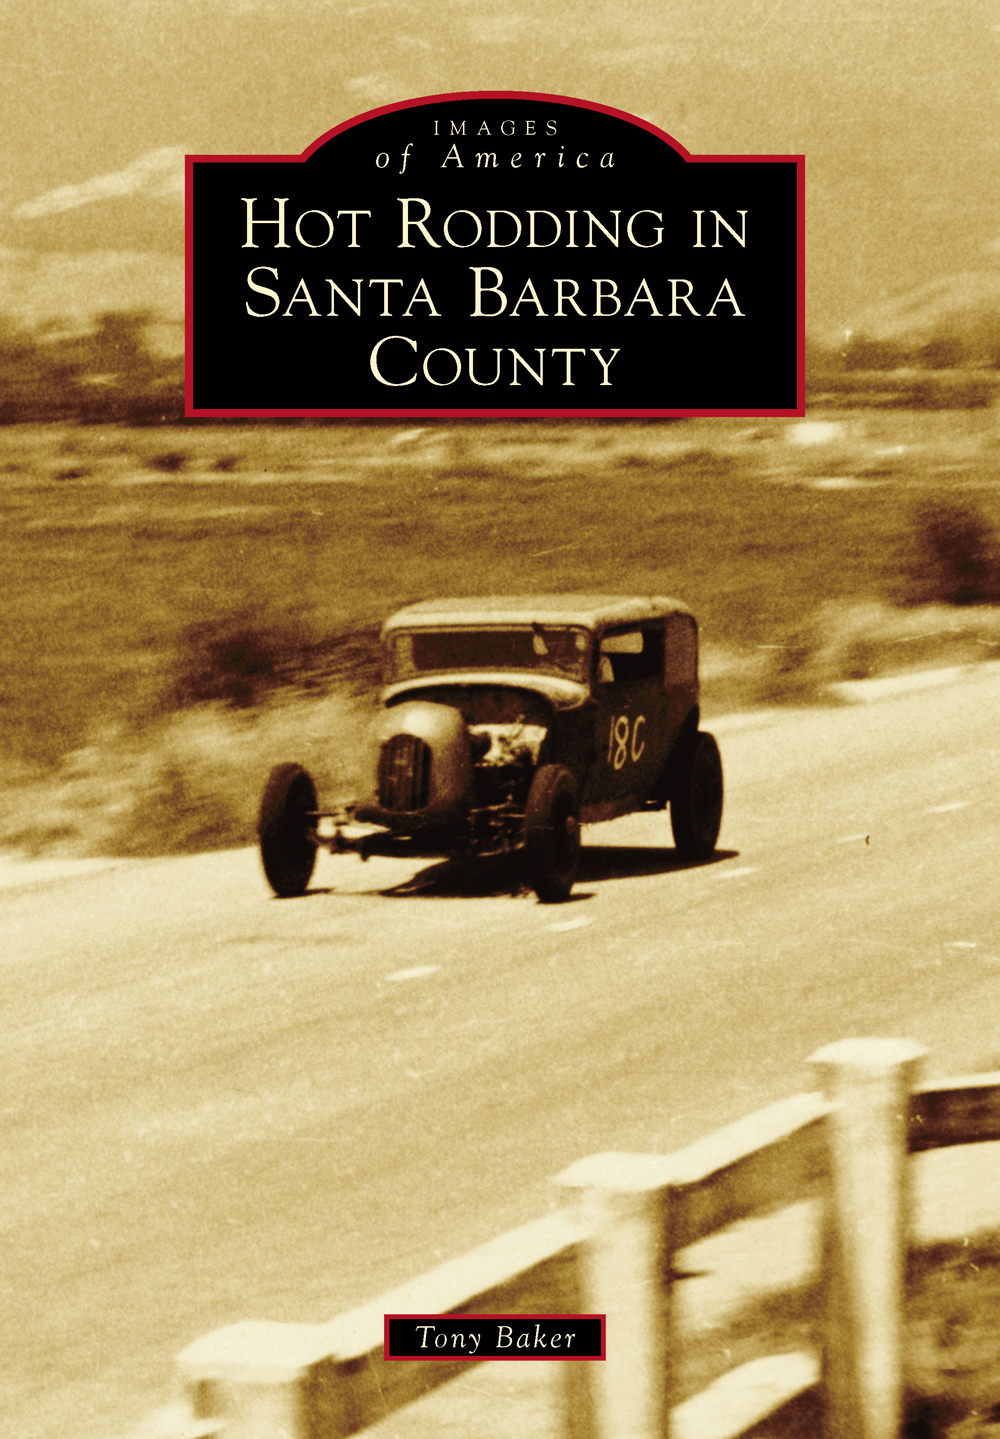 IMAGES of America HOT RODDING IN SANTA BARBARA COUNTY A pair of - photo 1